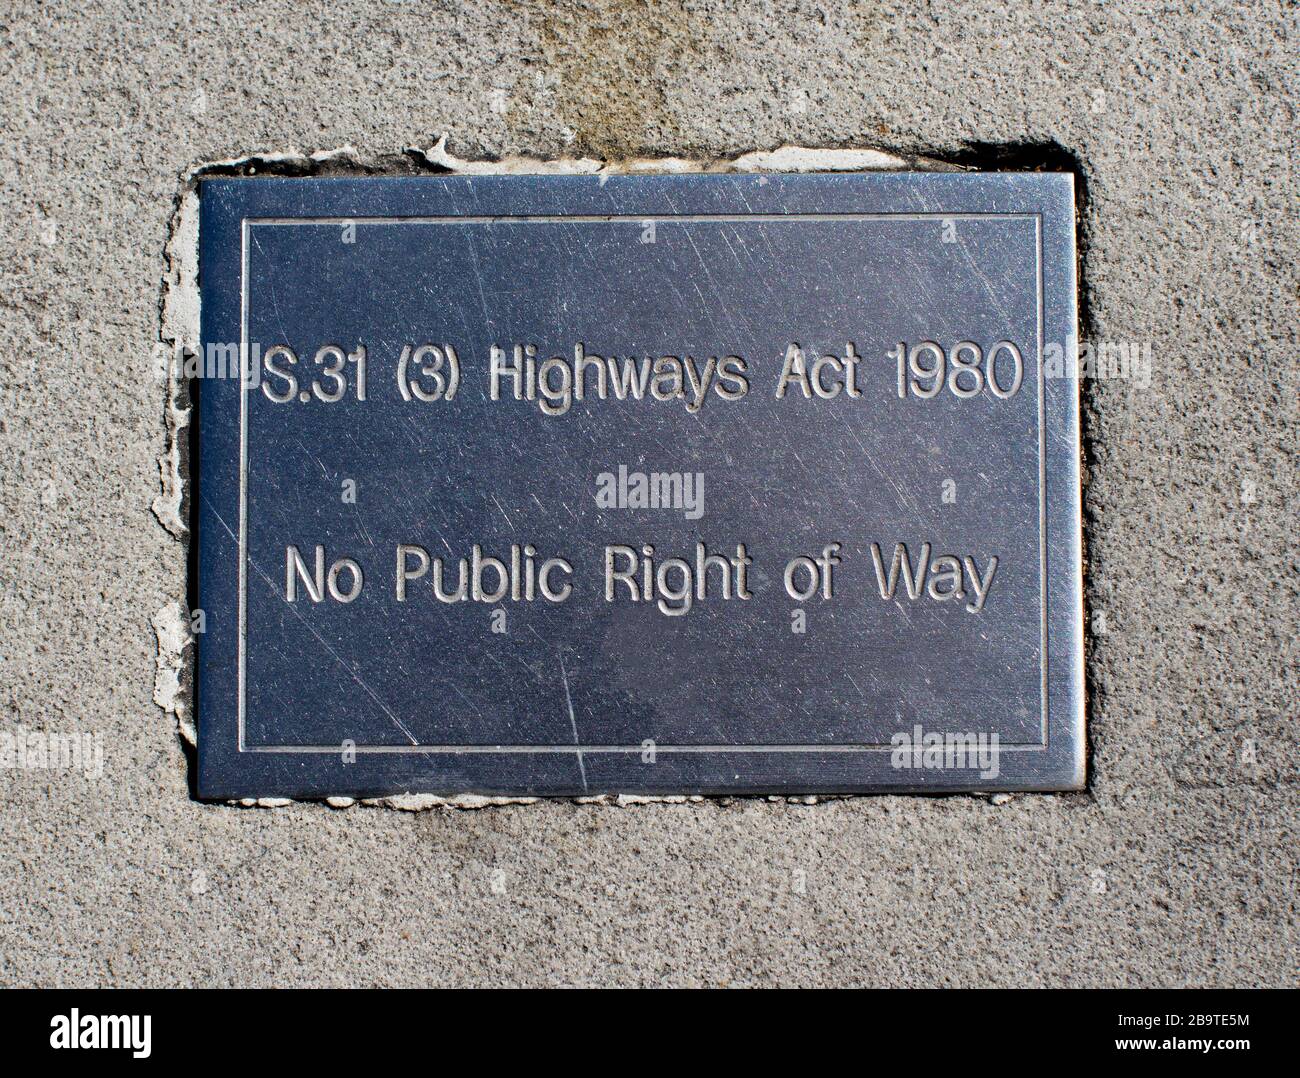 Sign indicating No Public Right of Way according to Highways Act, 1980, set into pavement on Duke of York Square, off the Kings Road, Chelsea, London Stock Photo